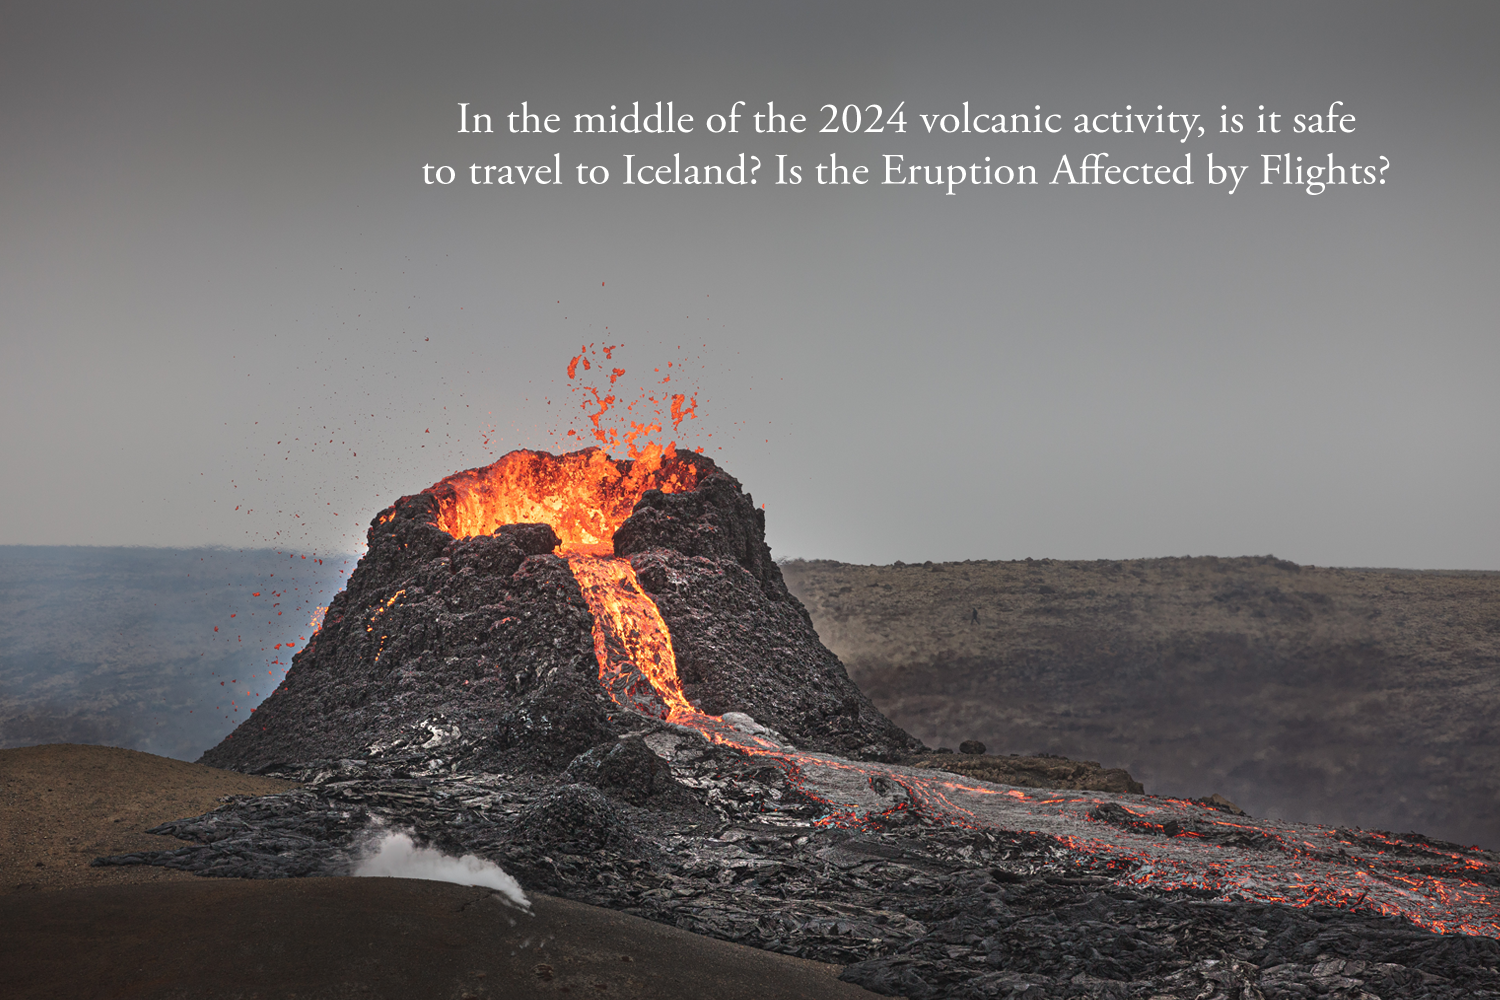 In the middle of the 2024 volcanic activity, is it safe to travel to Iceland? Is the Eruption Affected by Flights?